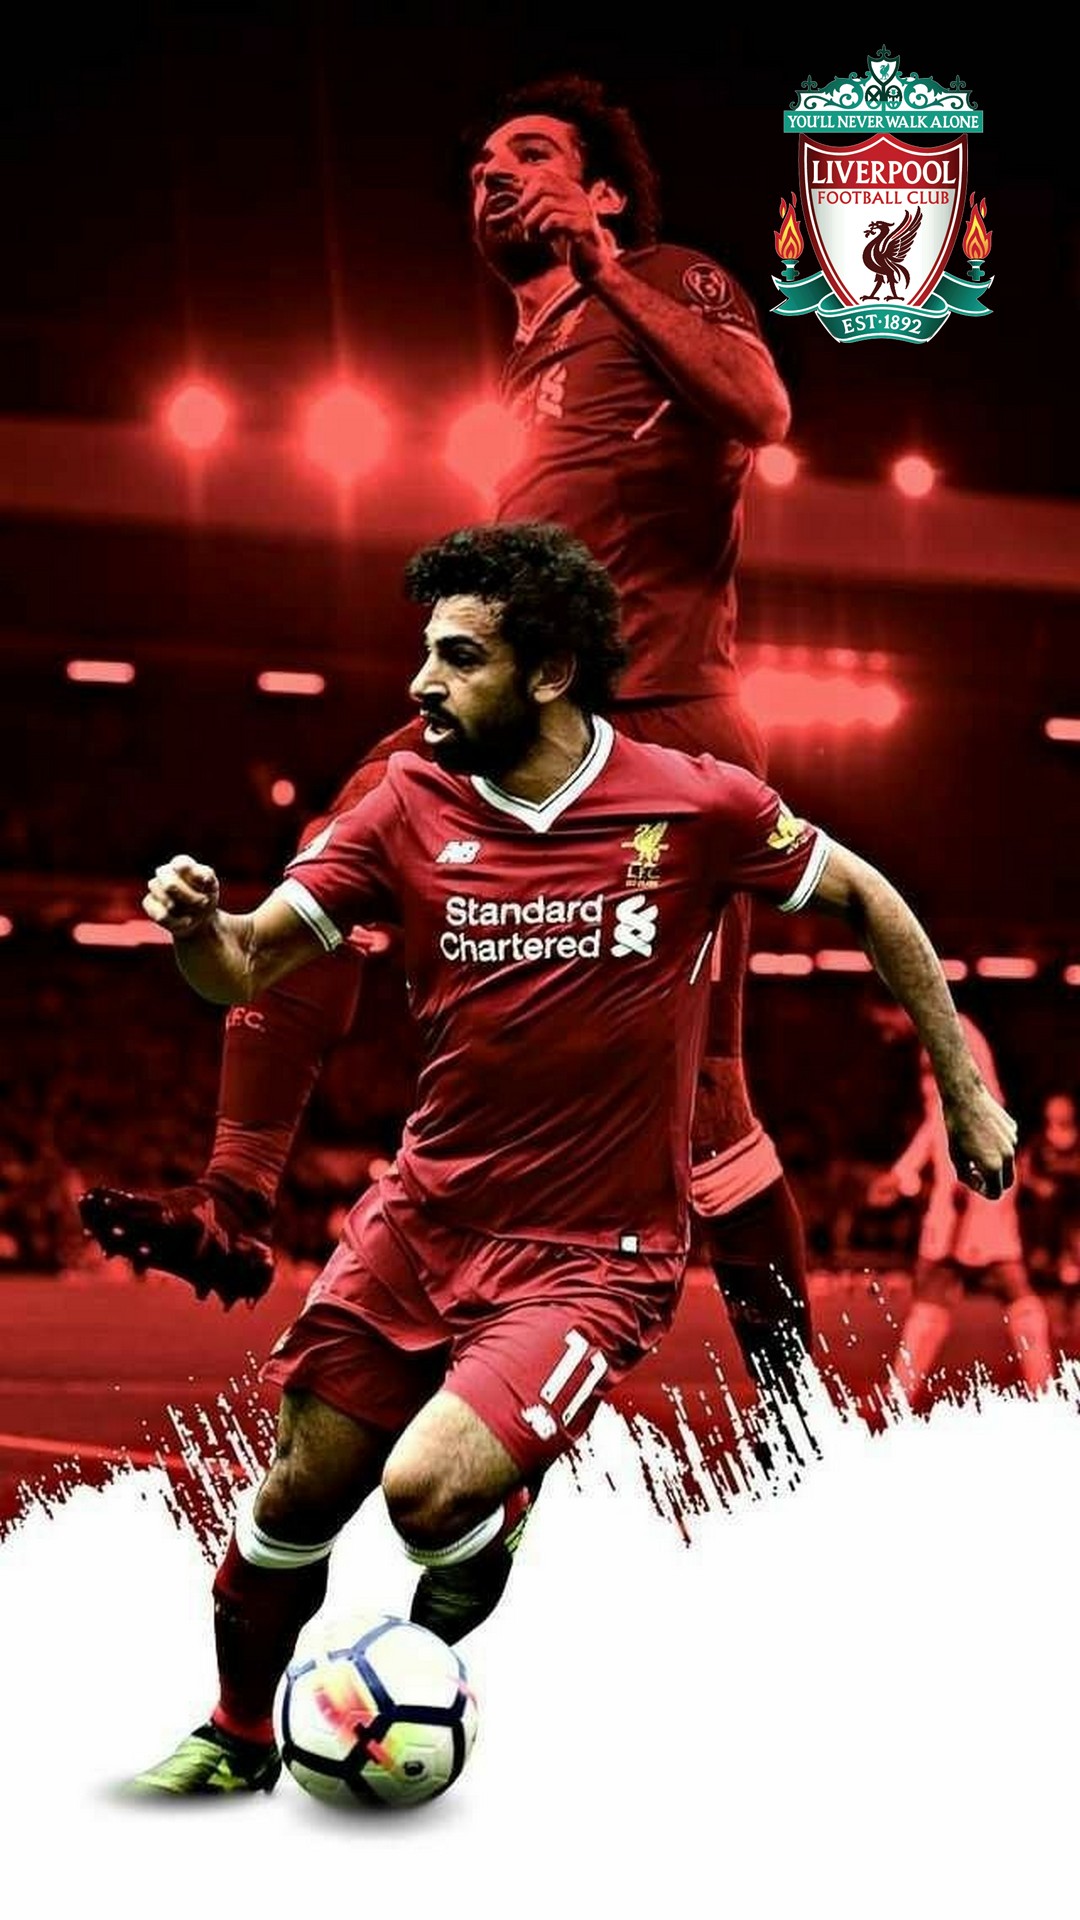 iPhone Wallpaper Mohamed Salah Pictures with resolution 1080X1920 pixel. You can make this wallpaper for your iPhone 5, 6, 7, 8, X backgrounds, Mobile Screensaver, or iPad Lock Screen